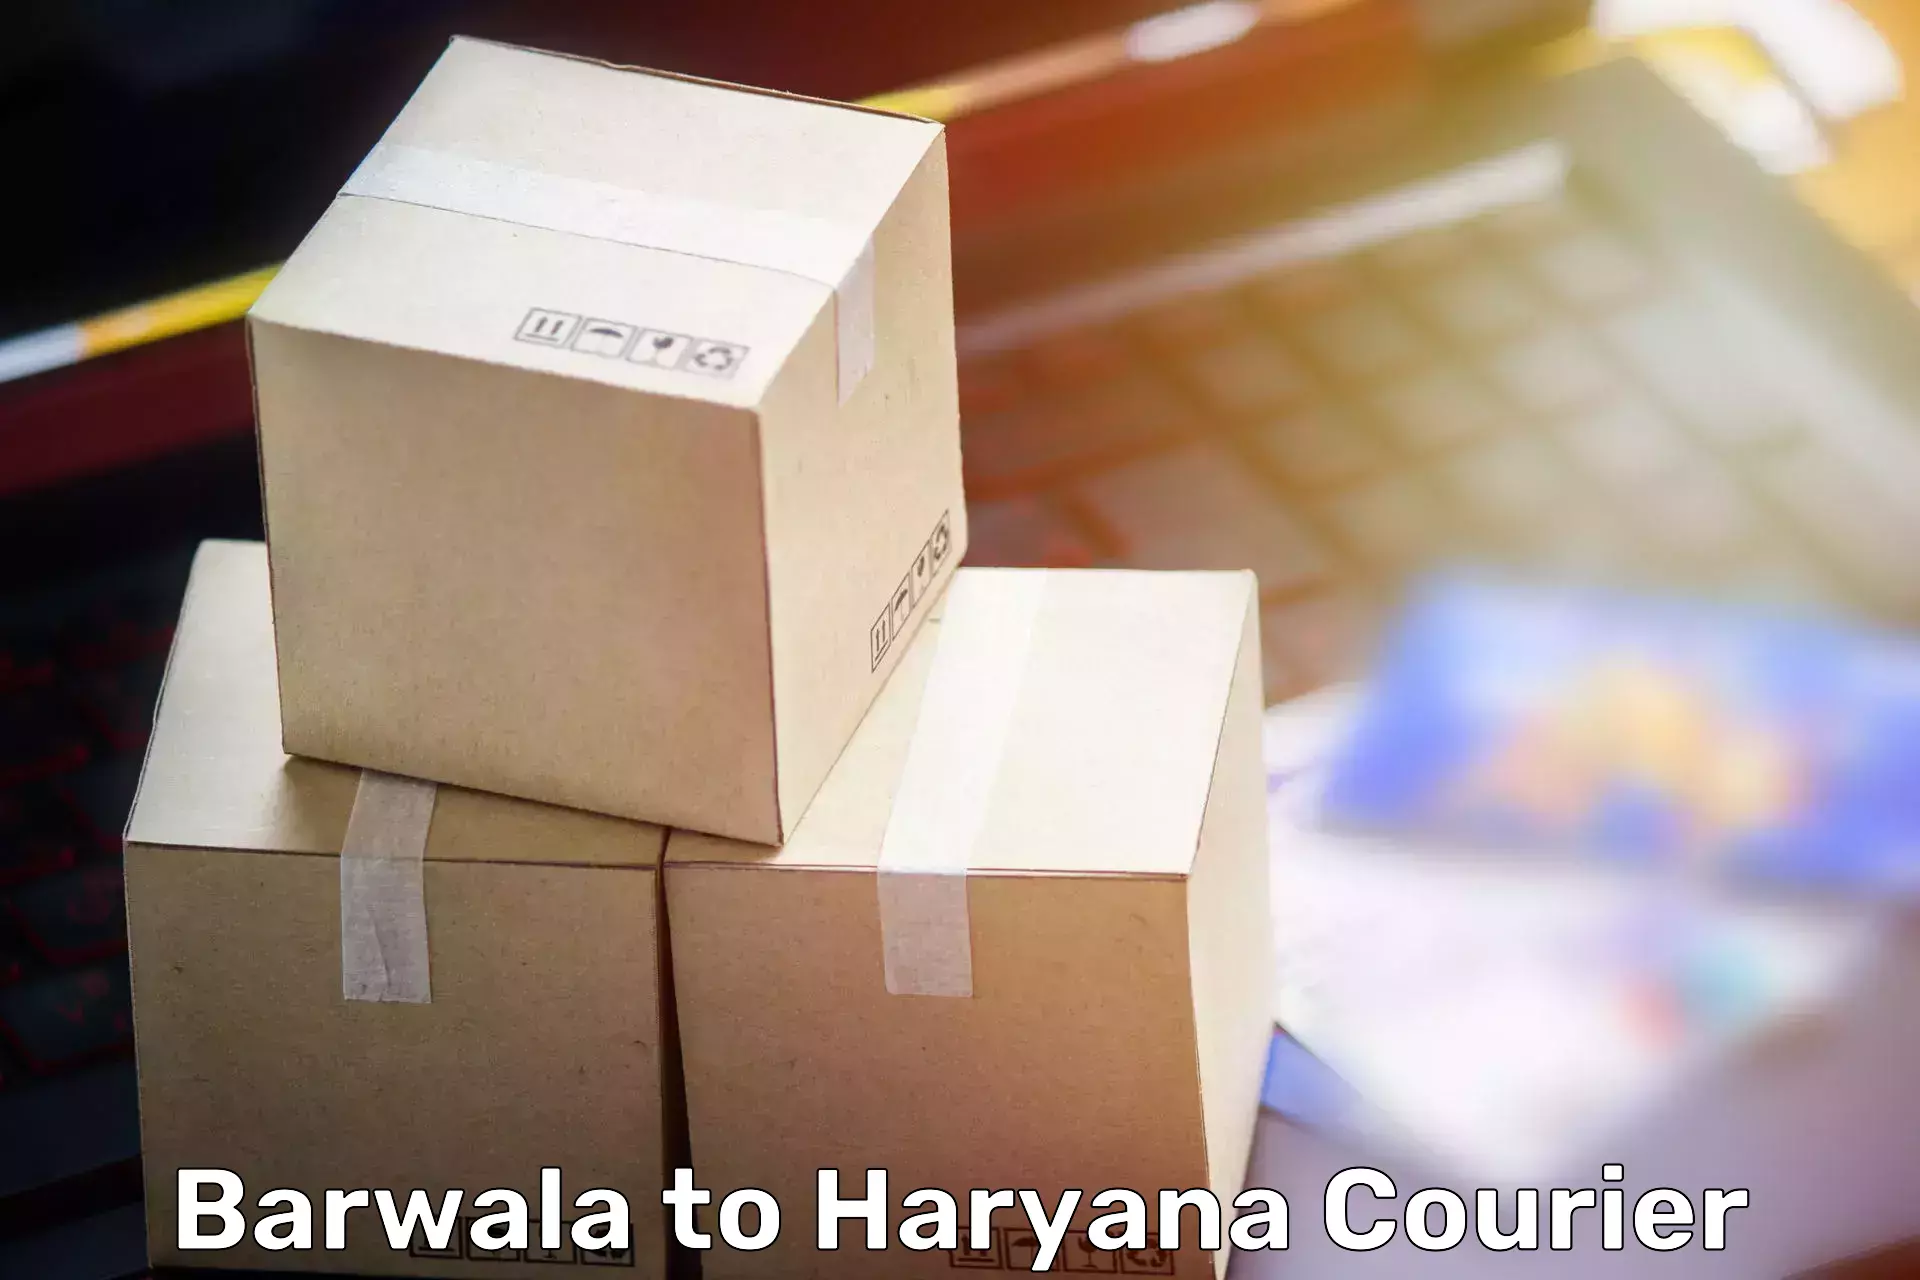 Trusted relocation services Barwala to Gurugram